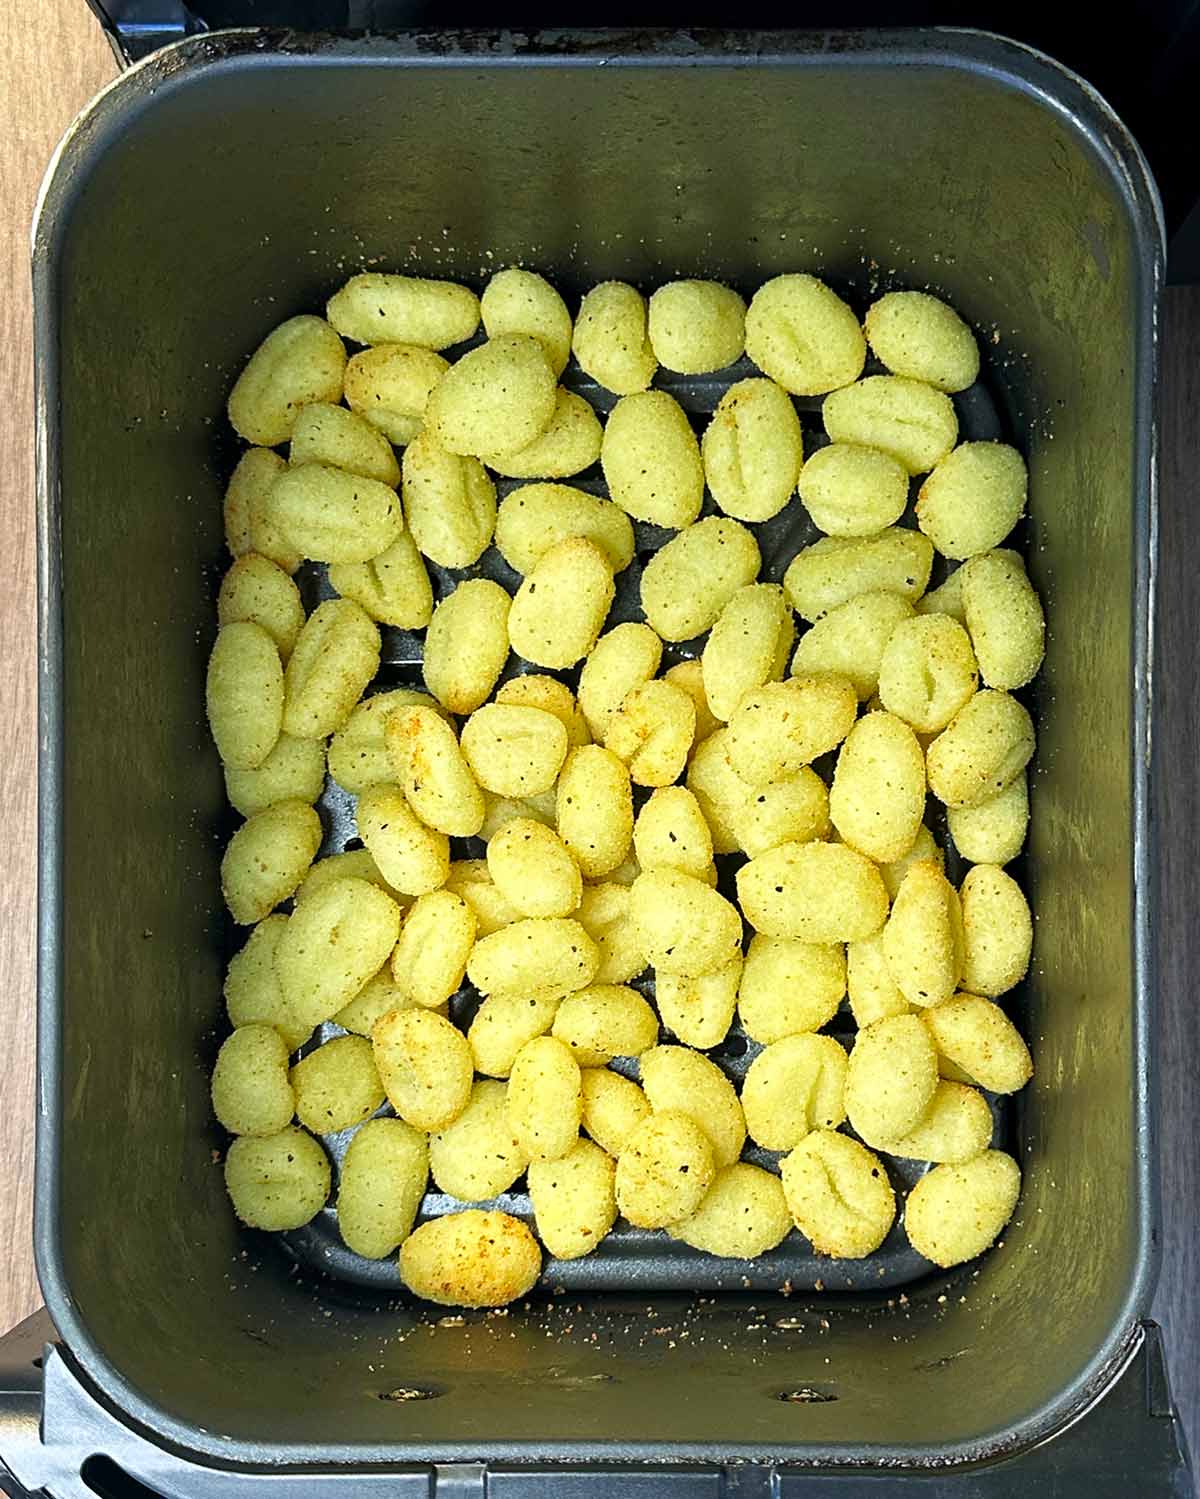 Cooked gnocchi in an air fryer basket.